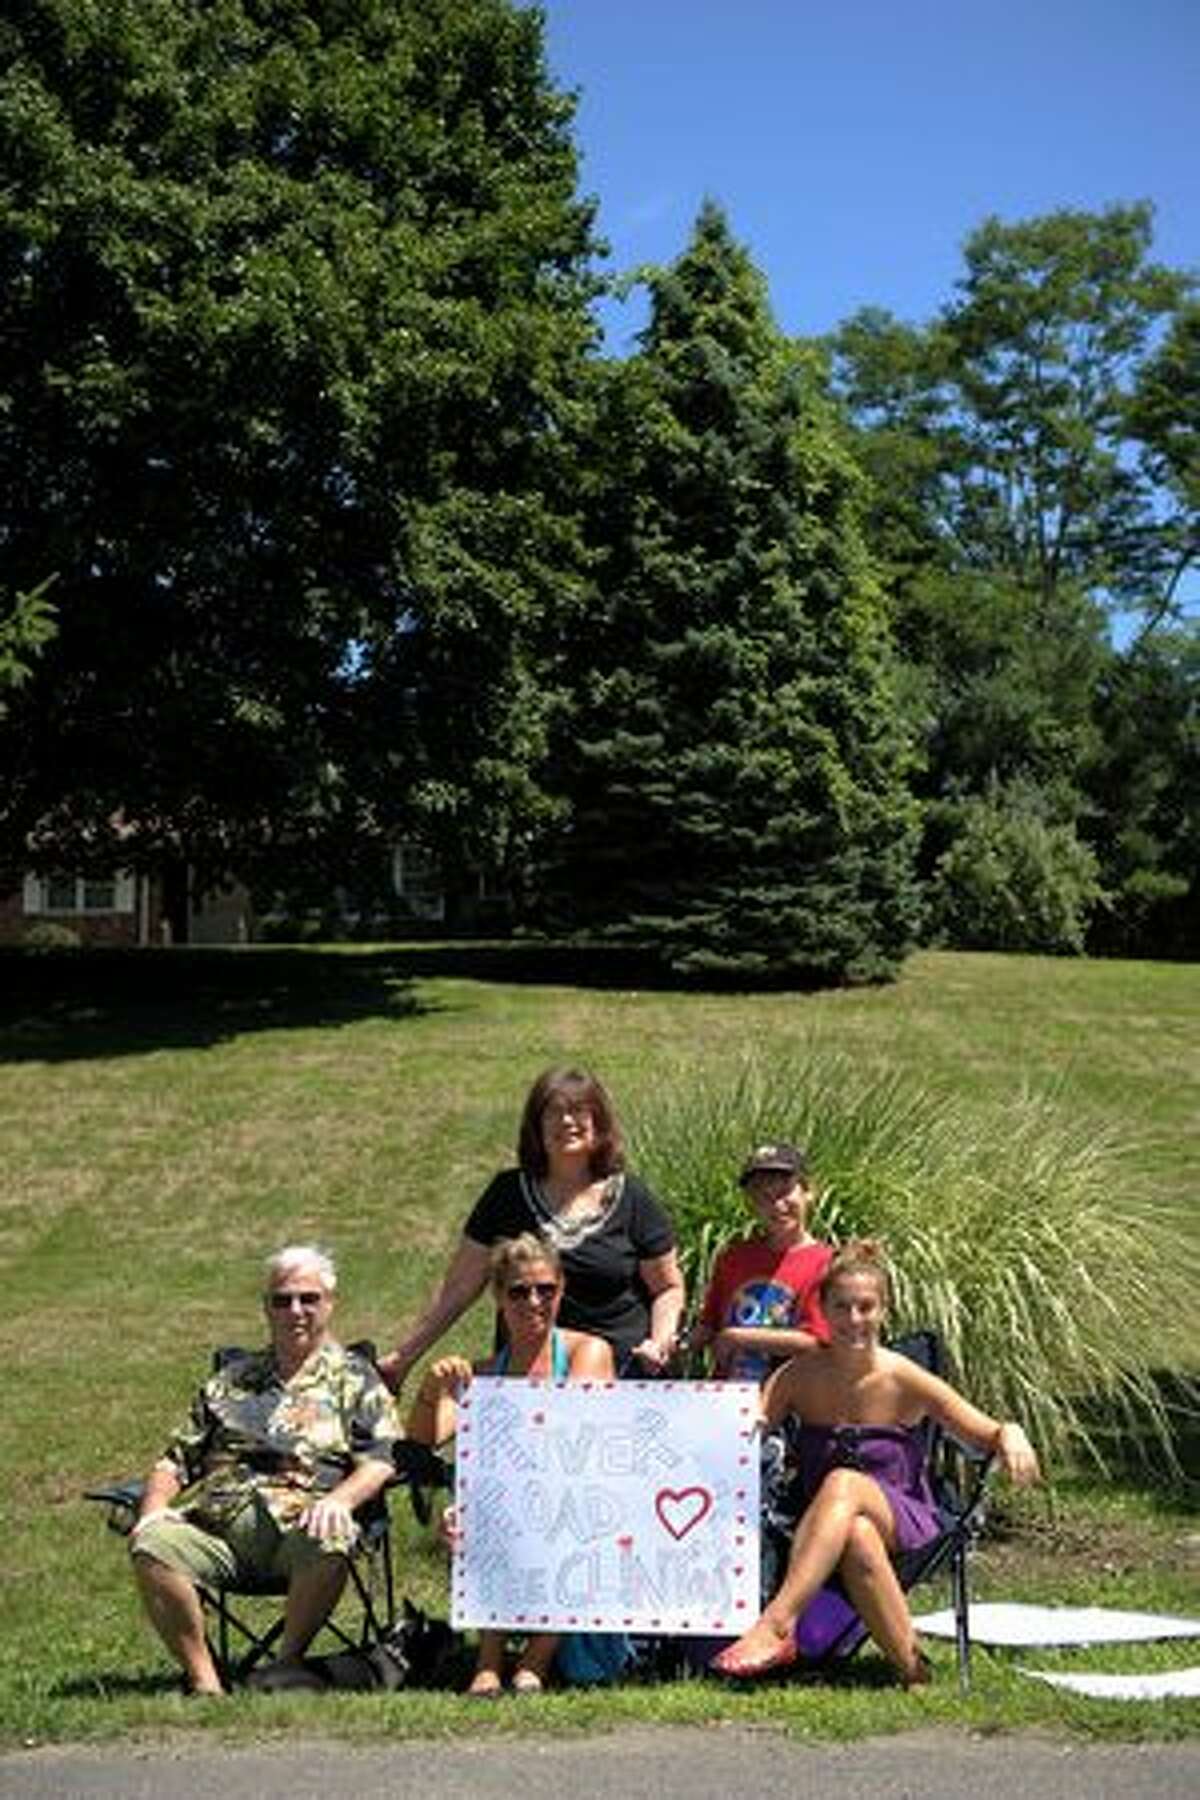 Rhinebeck residents (front row L-R) Norman Gastman, Rachael Scorca, Harleigh Gastman, (back row L-R) Amy Scorca and Uri Rooselaar hold up a sign showing their support as the town prepares for the wedding of Chelsea Clinton and Marc Mezvinsky on July 31, 2010 in Rhinebeck, New York.